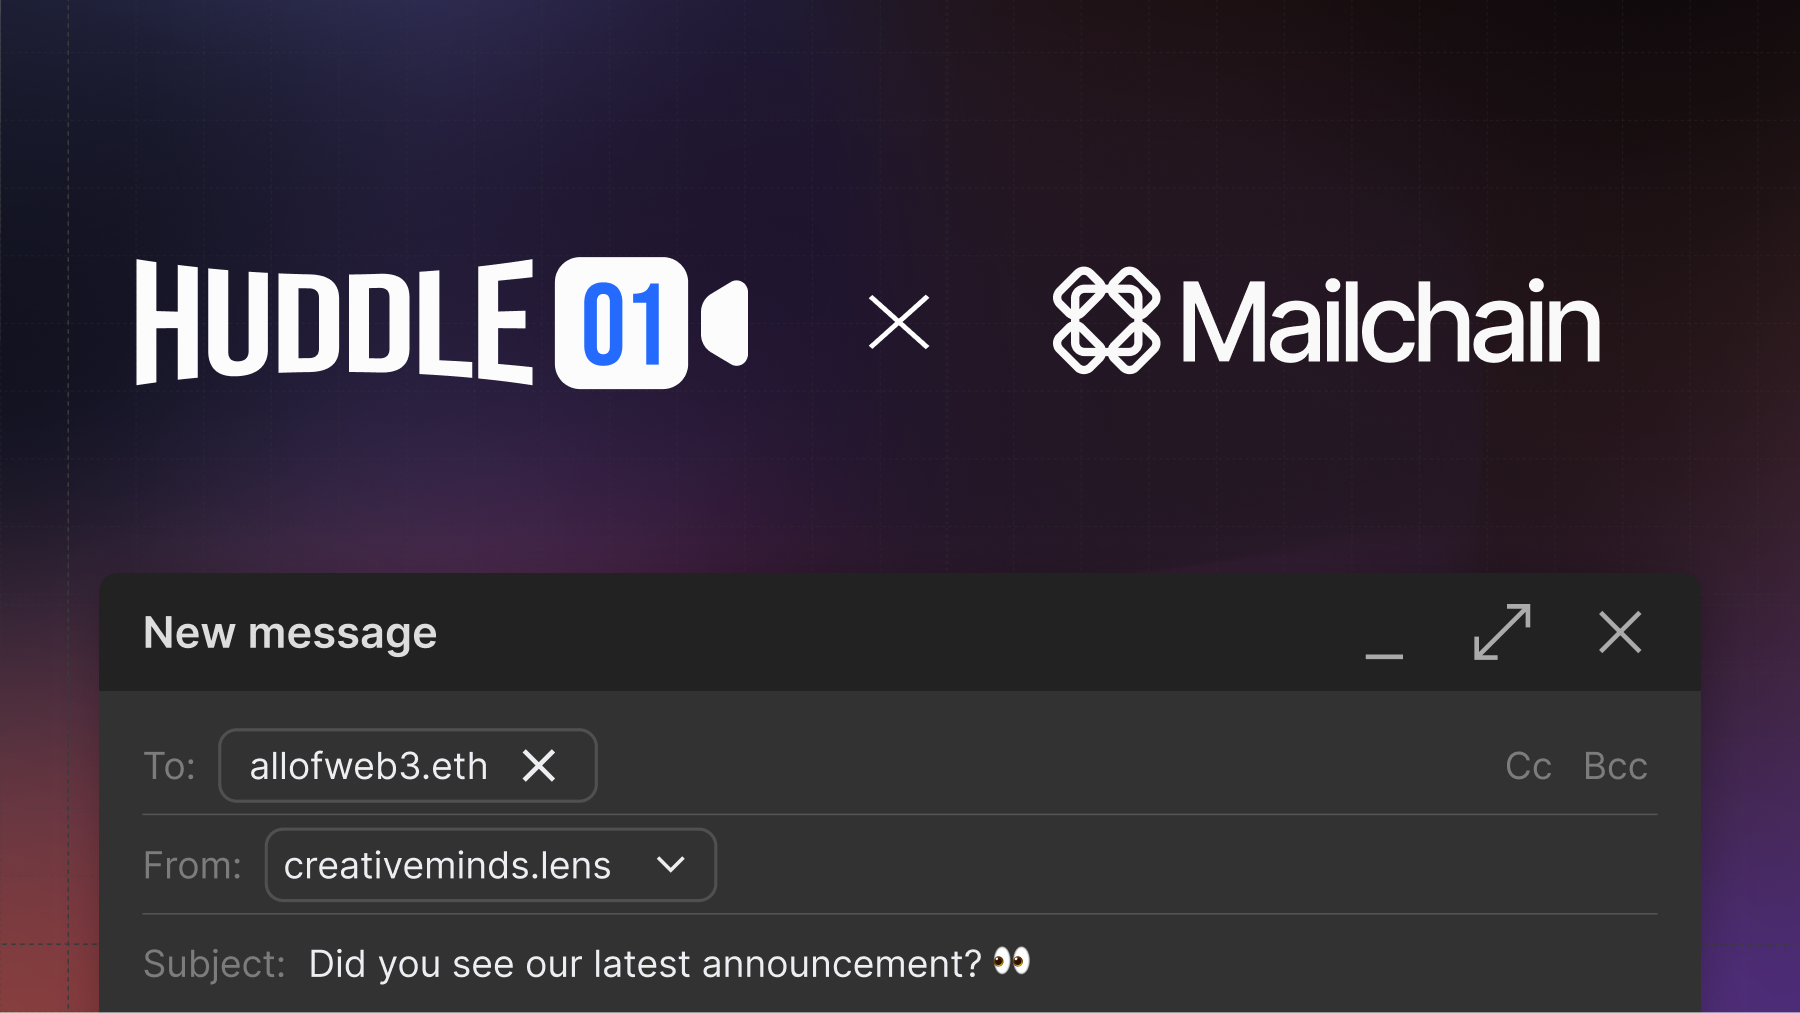 Huddle01 & Mailchain integration with a new web3 email being composed